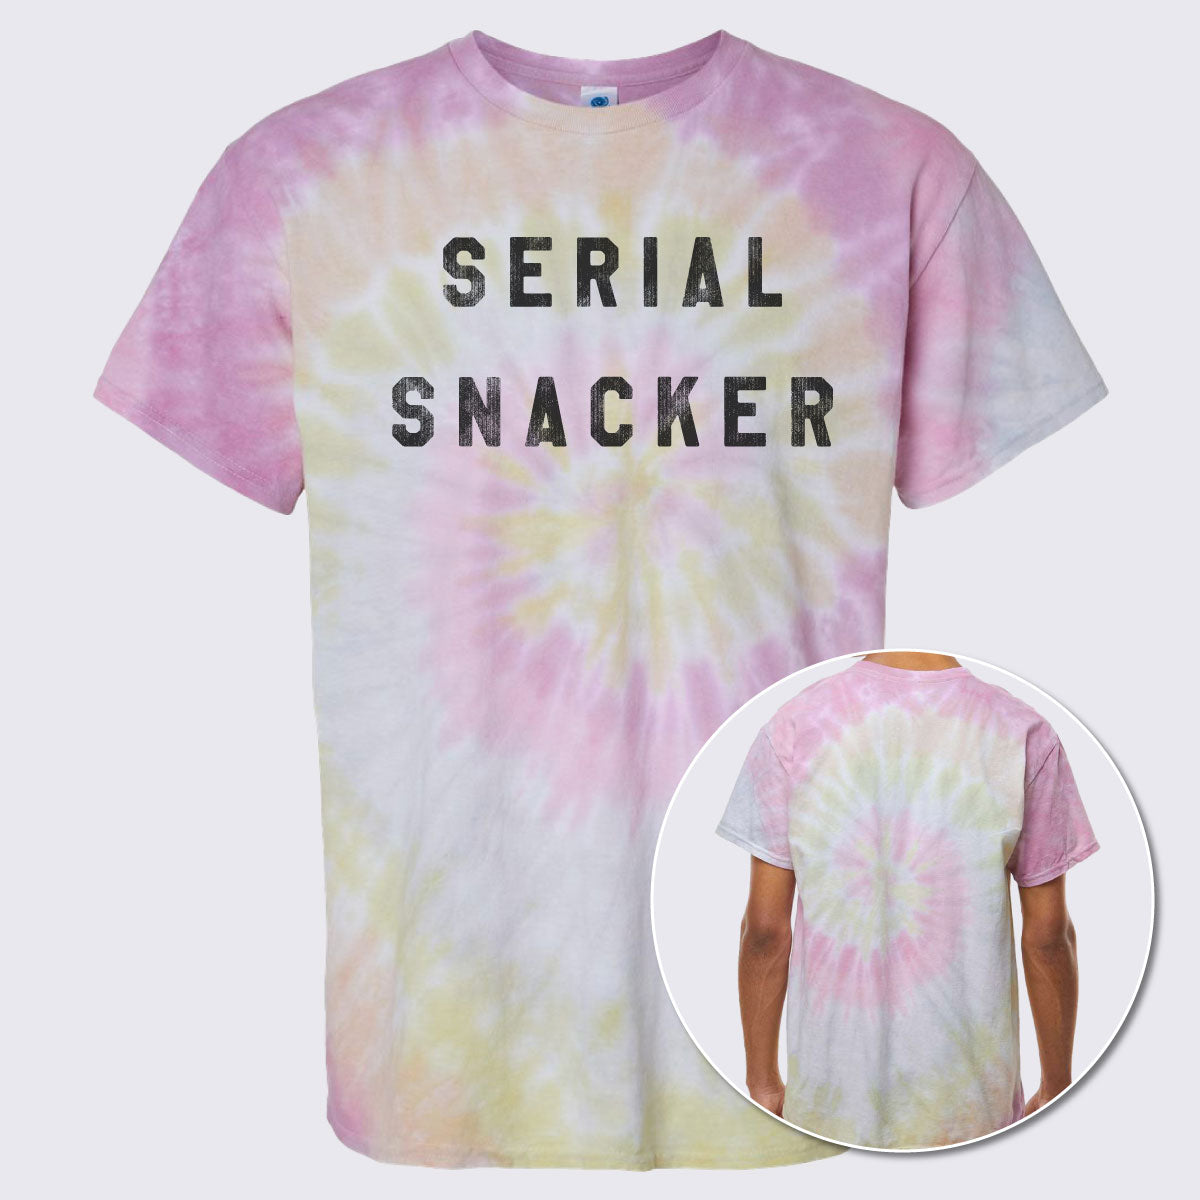 Serial Snacker Multi-Color Tie-Dyed T-Shirt